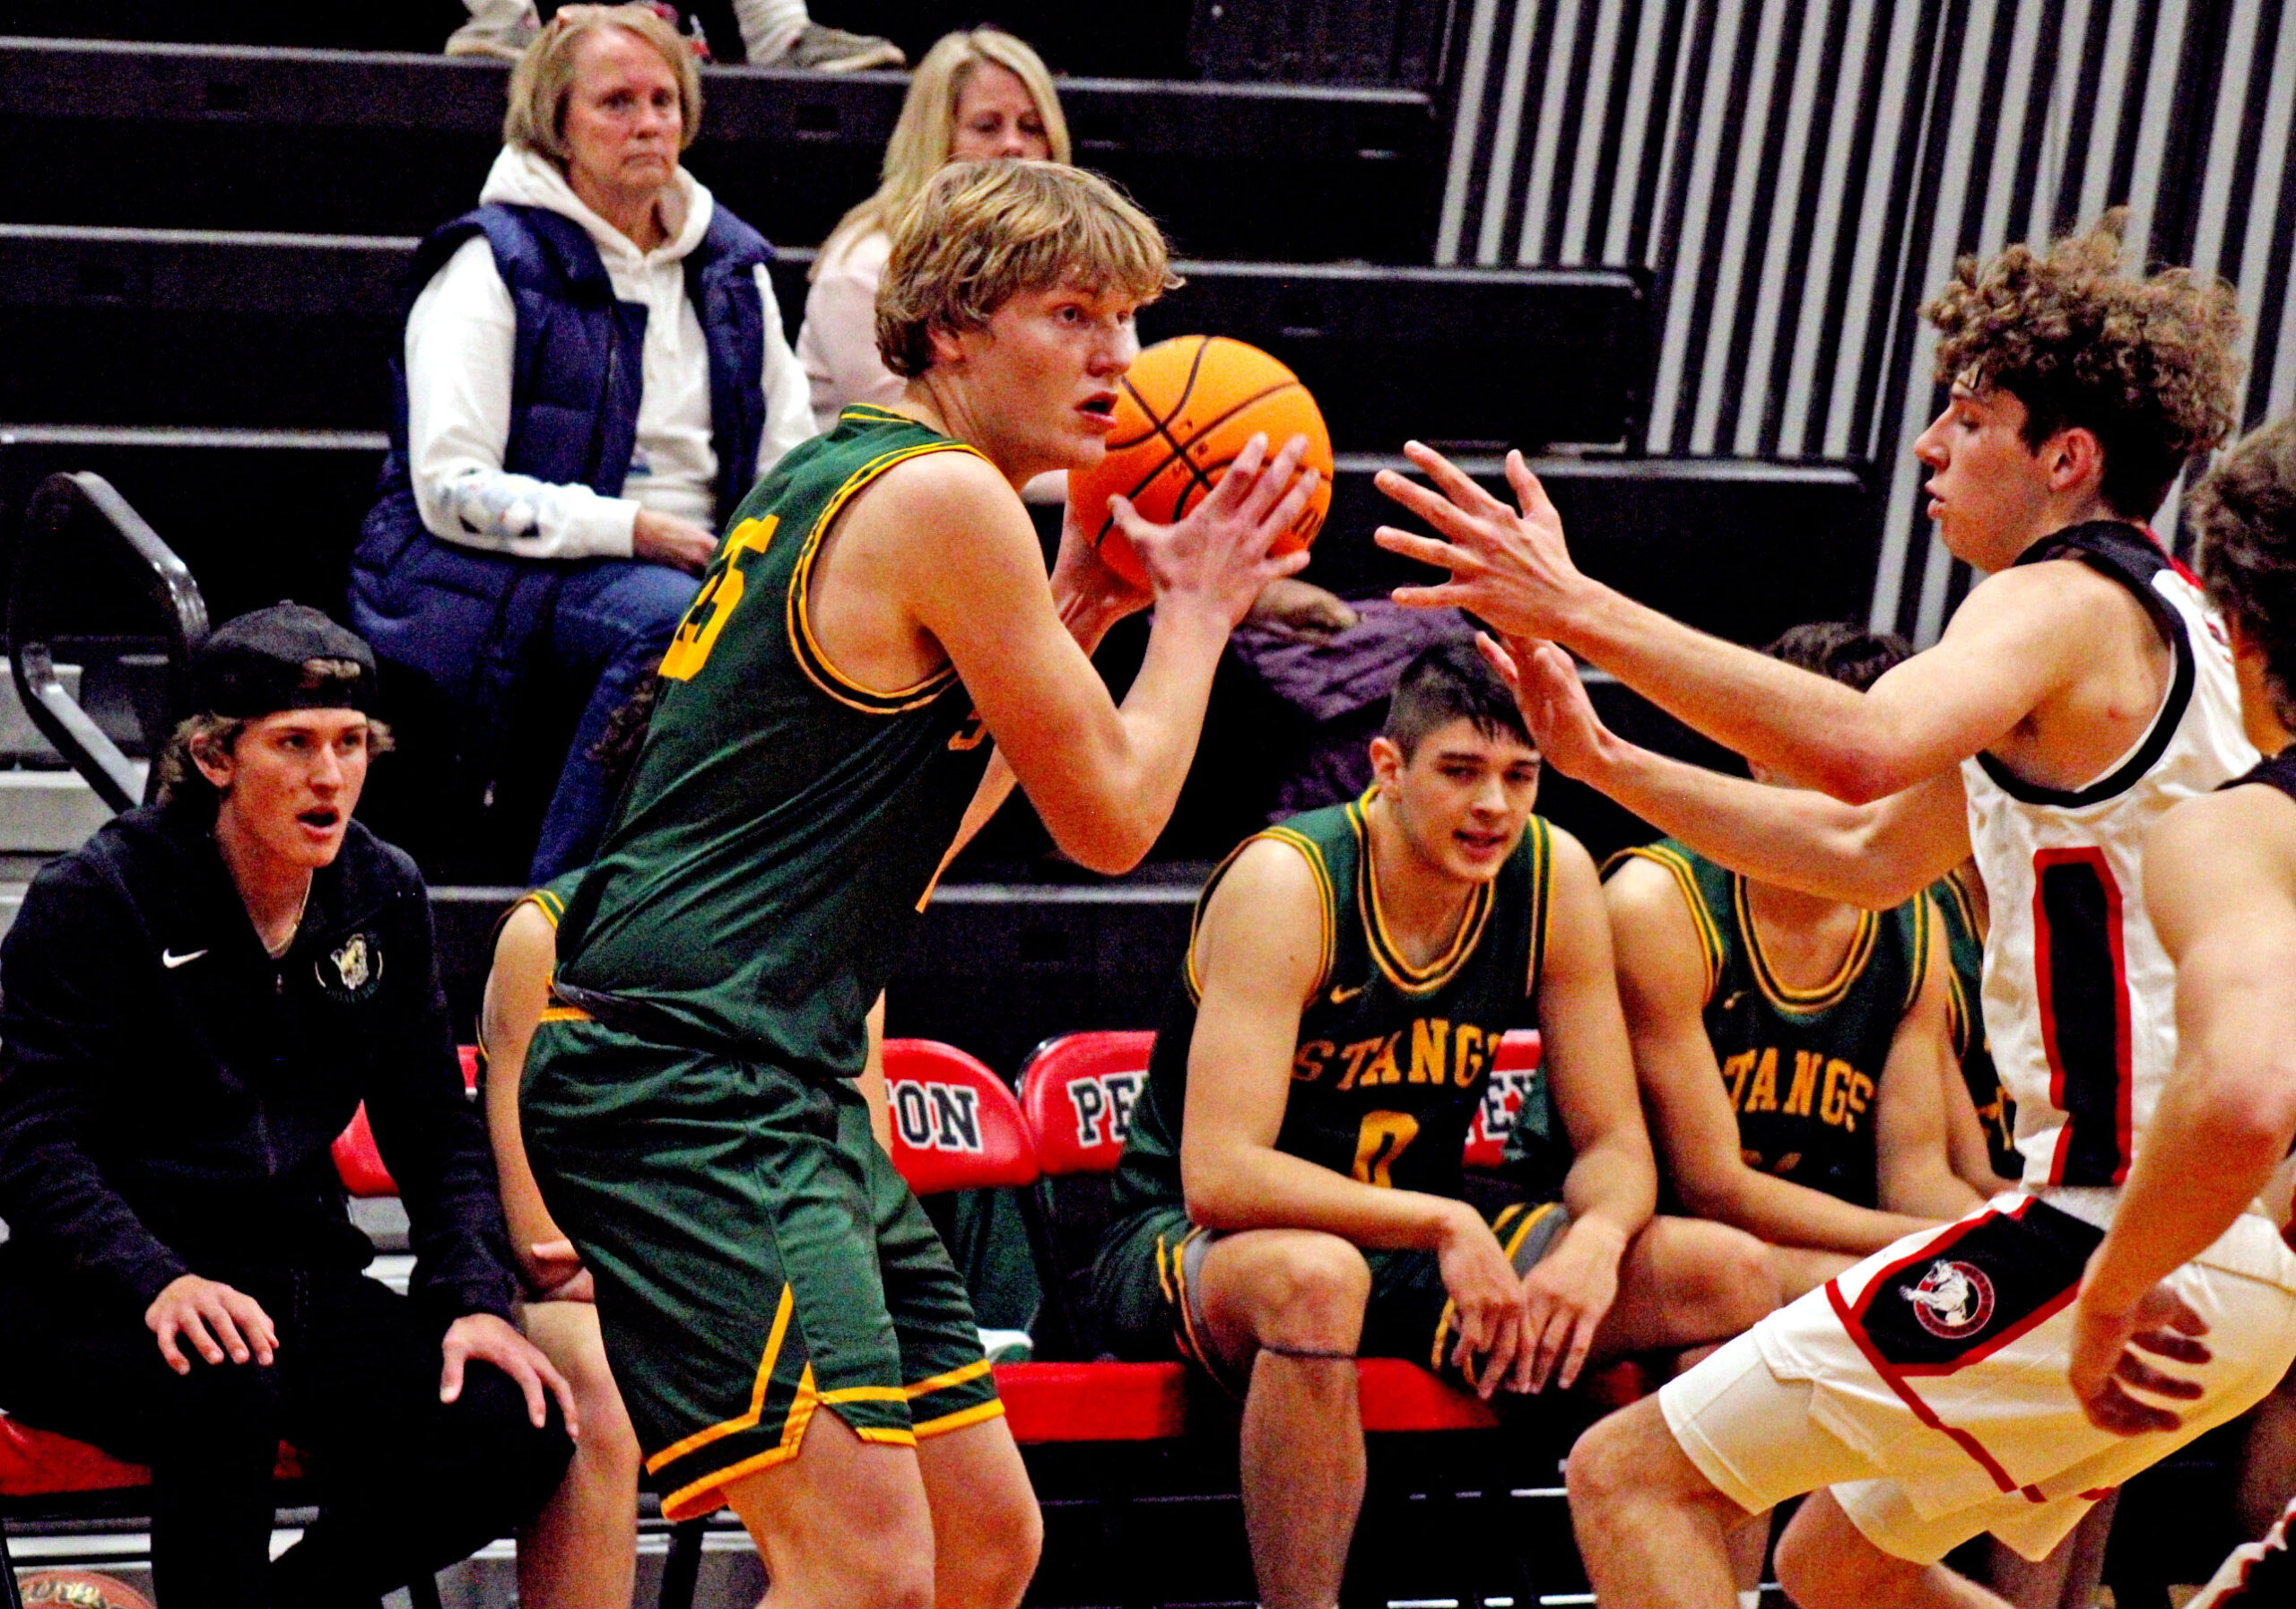 Photo by Daniel Mohrmann. Manitou Springs forward Nate Gentzel waits for an open shooter during the Mustangs’ win over Peyton on Nov. 30.